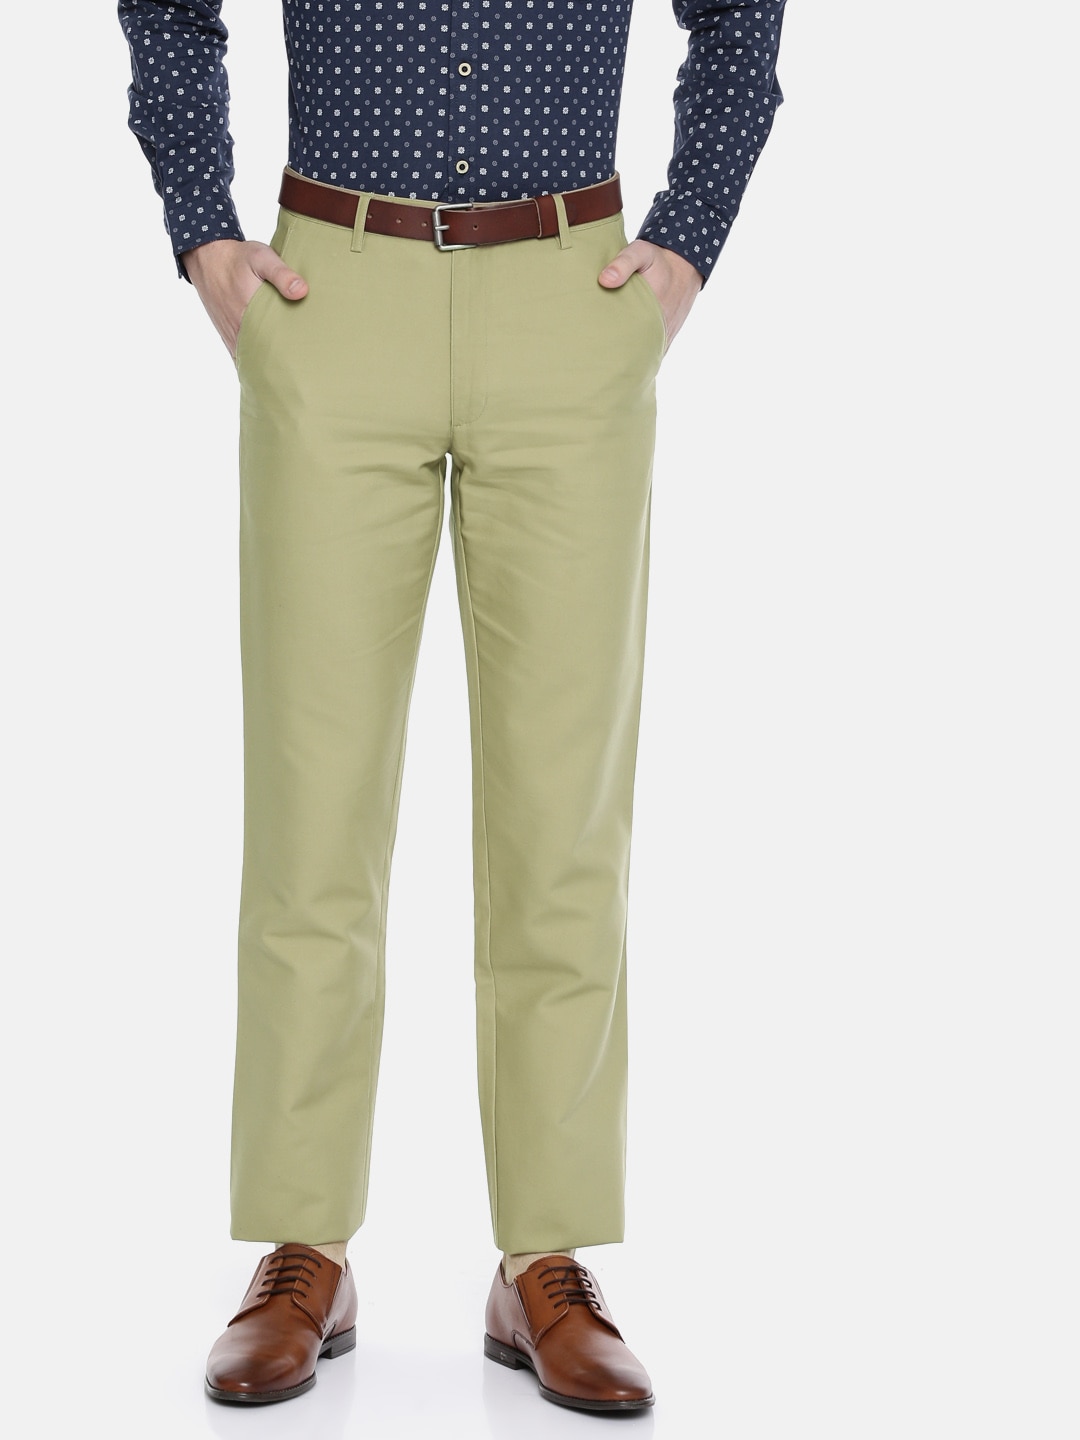 Buy Louis Philippe Black Trousers Online  775748  Louis Philippe